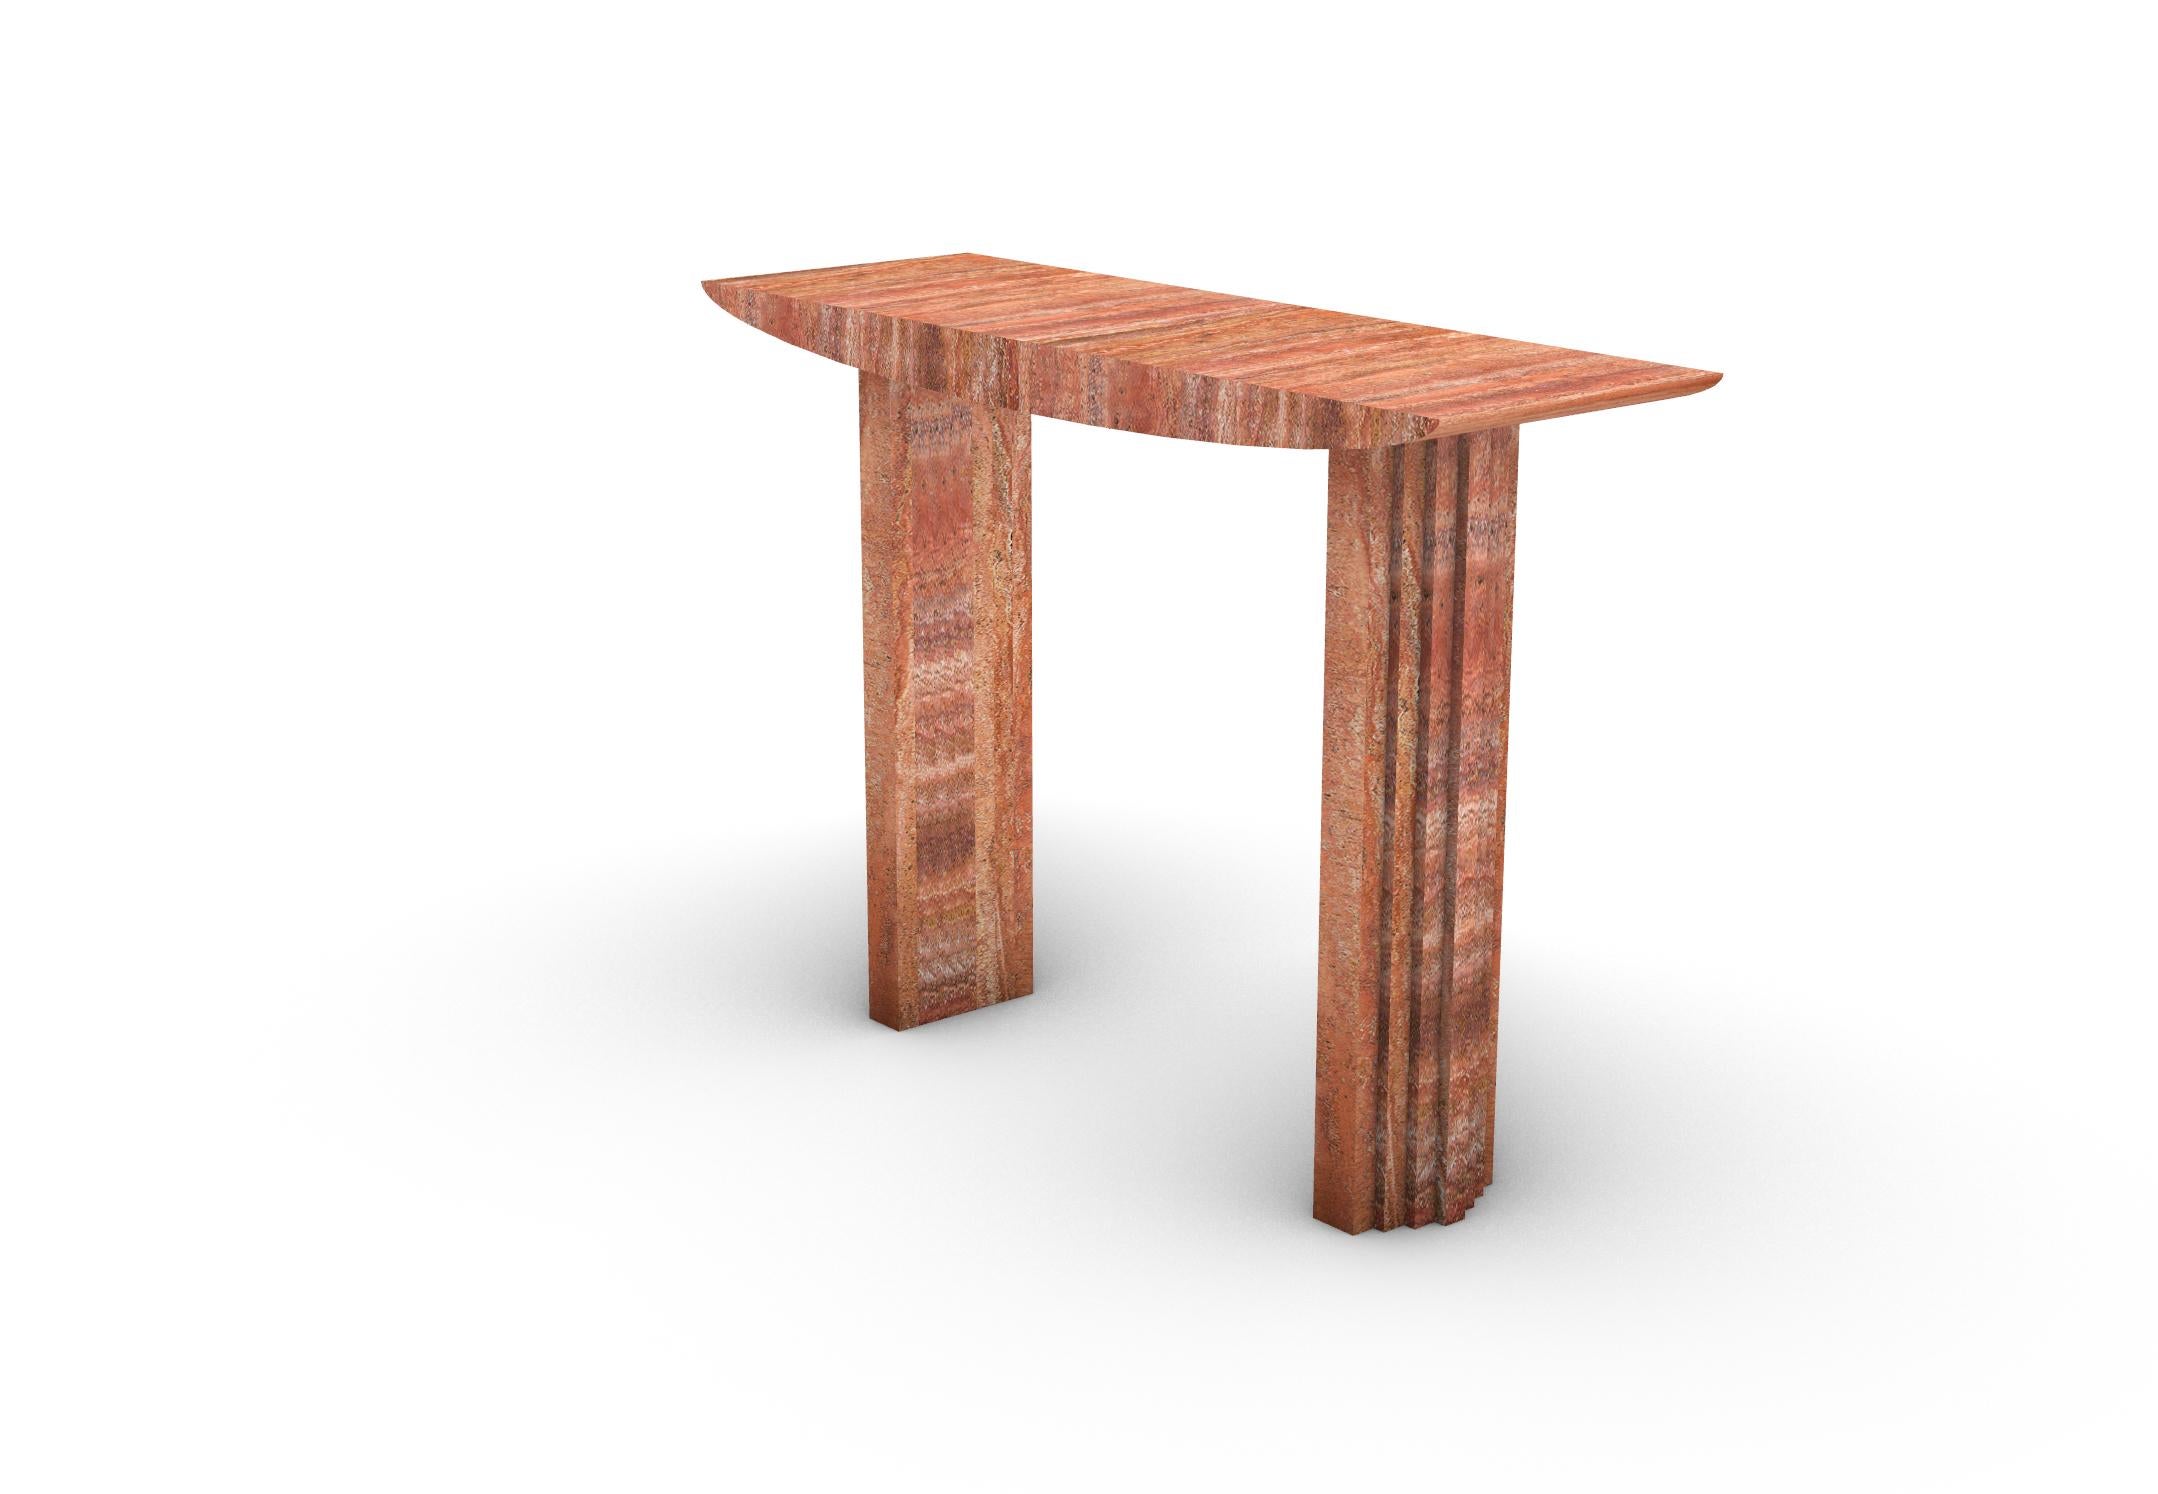 Sculptural Console table 0024c in Red Travertine stone by artist Desia Ava For Sale 2